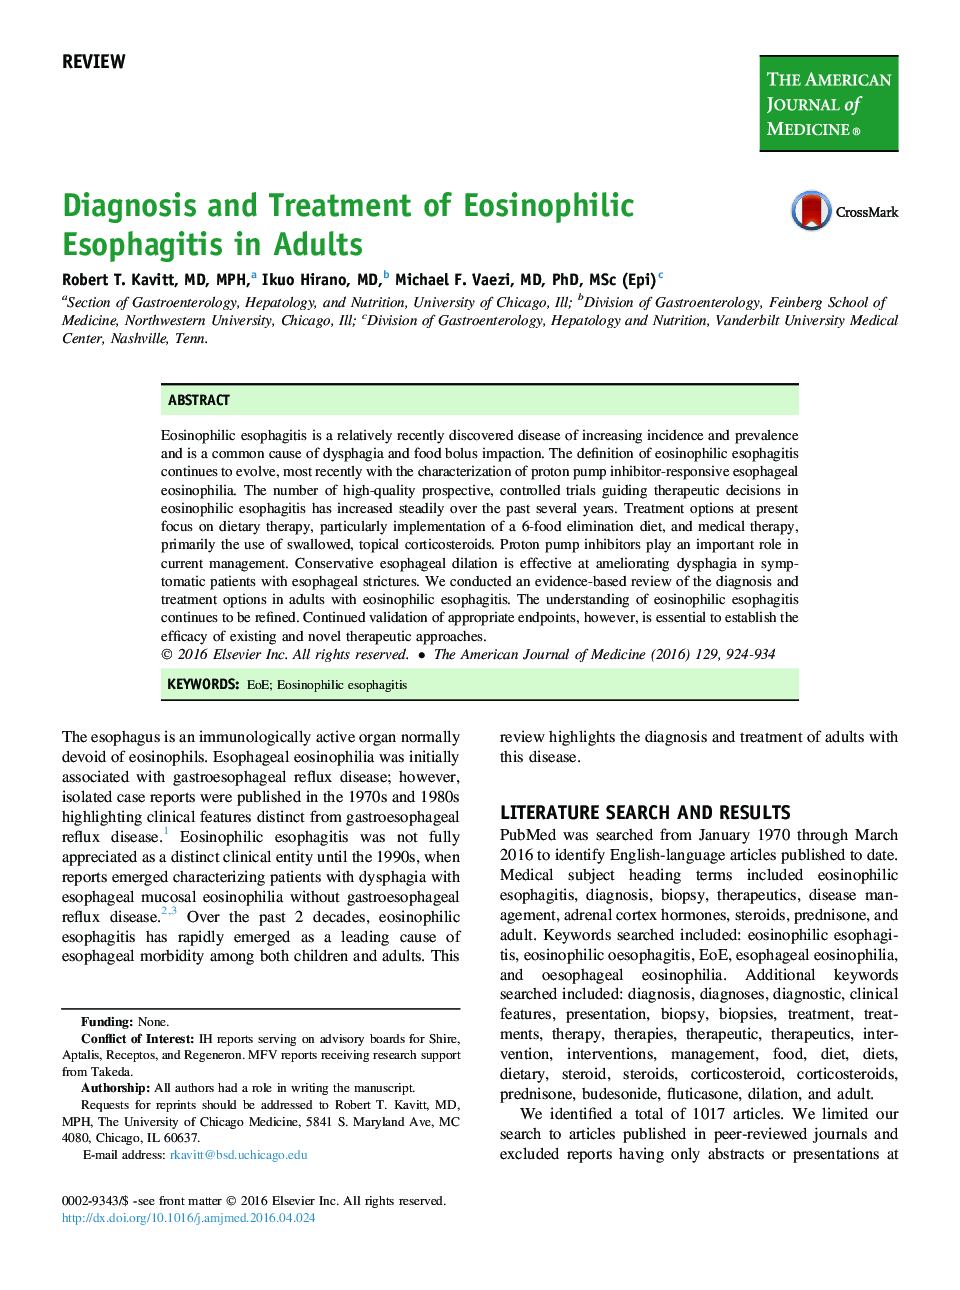 Diagnosis and Treatment of Eosinophilic Esophagitis in Adults 